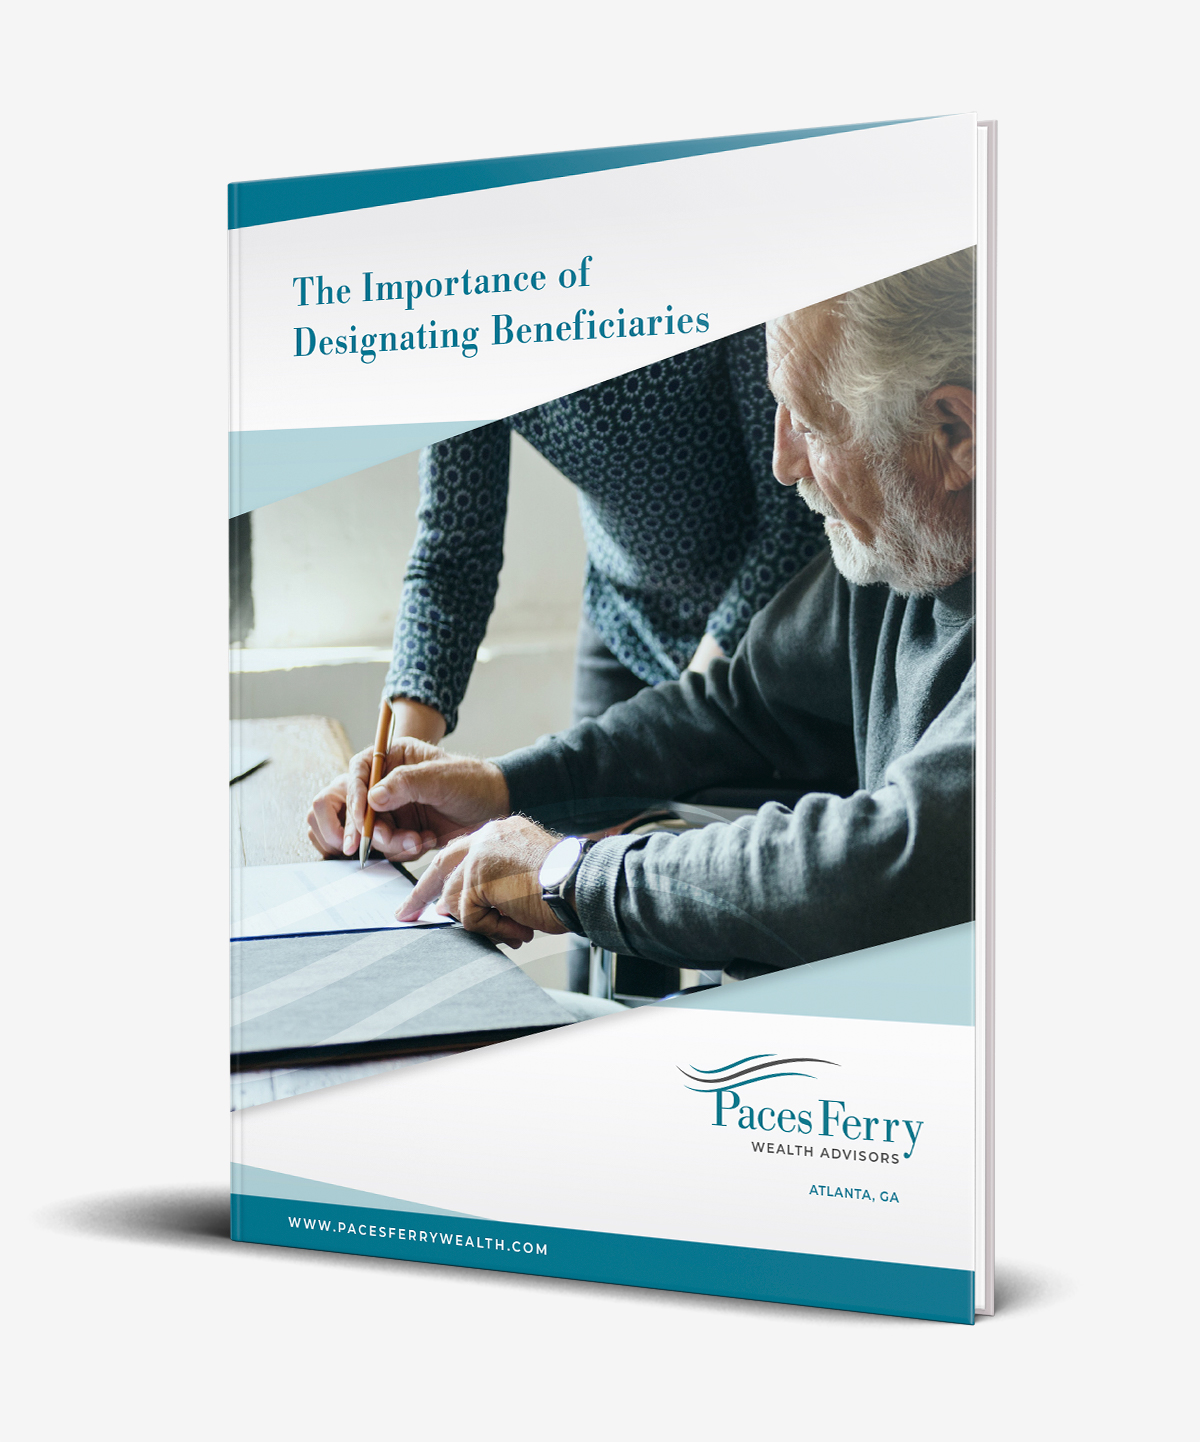 THE IMPORTANCE OF DESIGNATING BENEFICIARIES